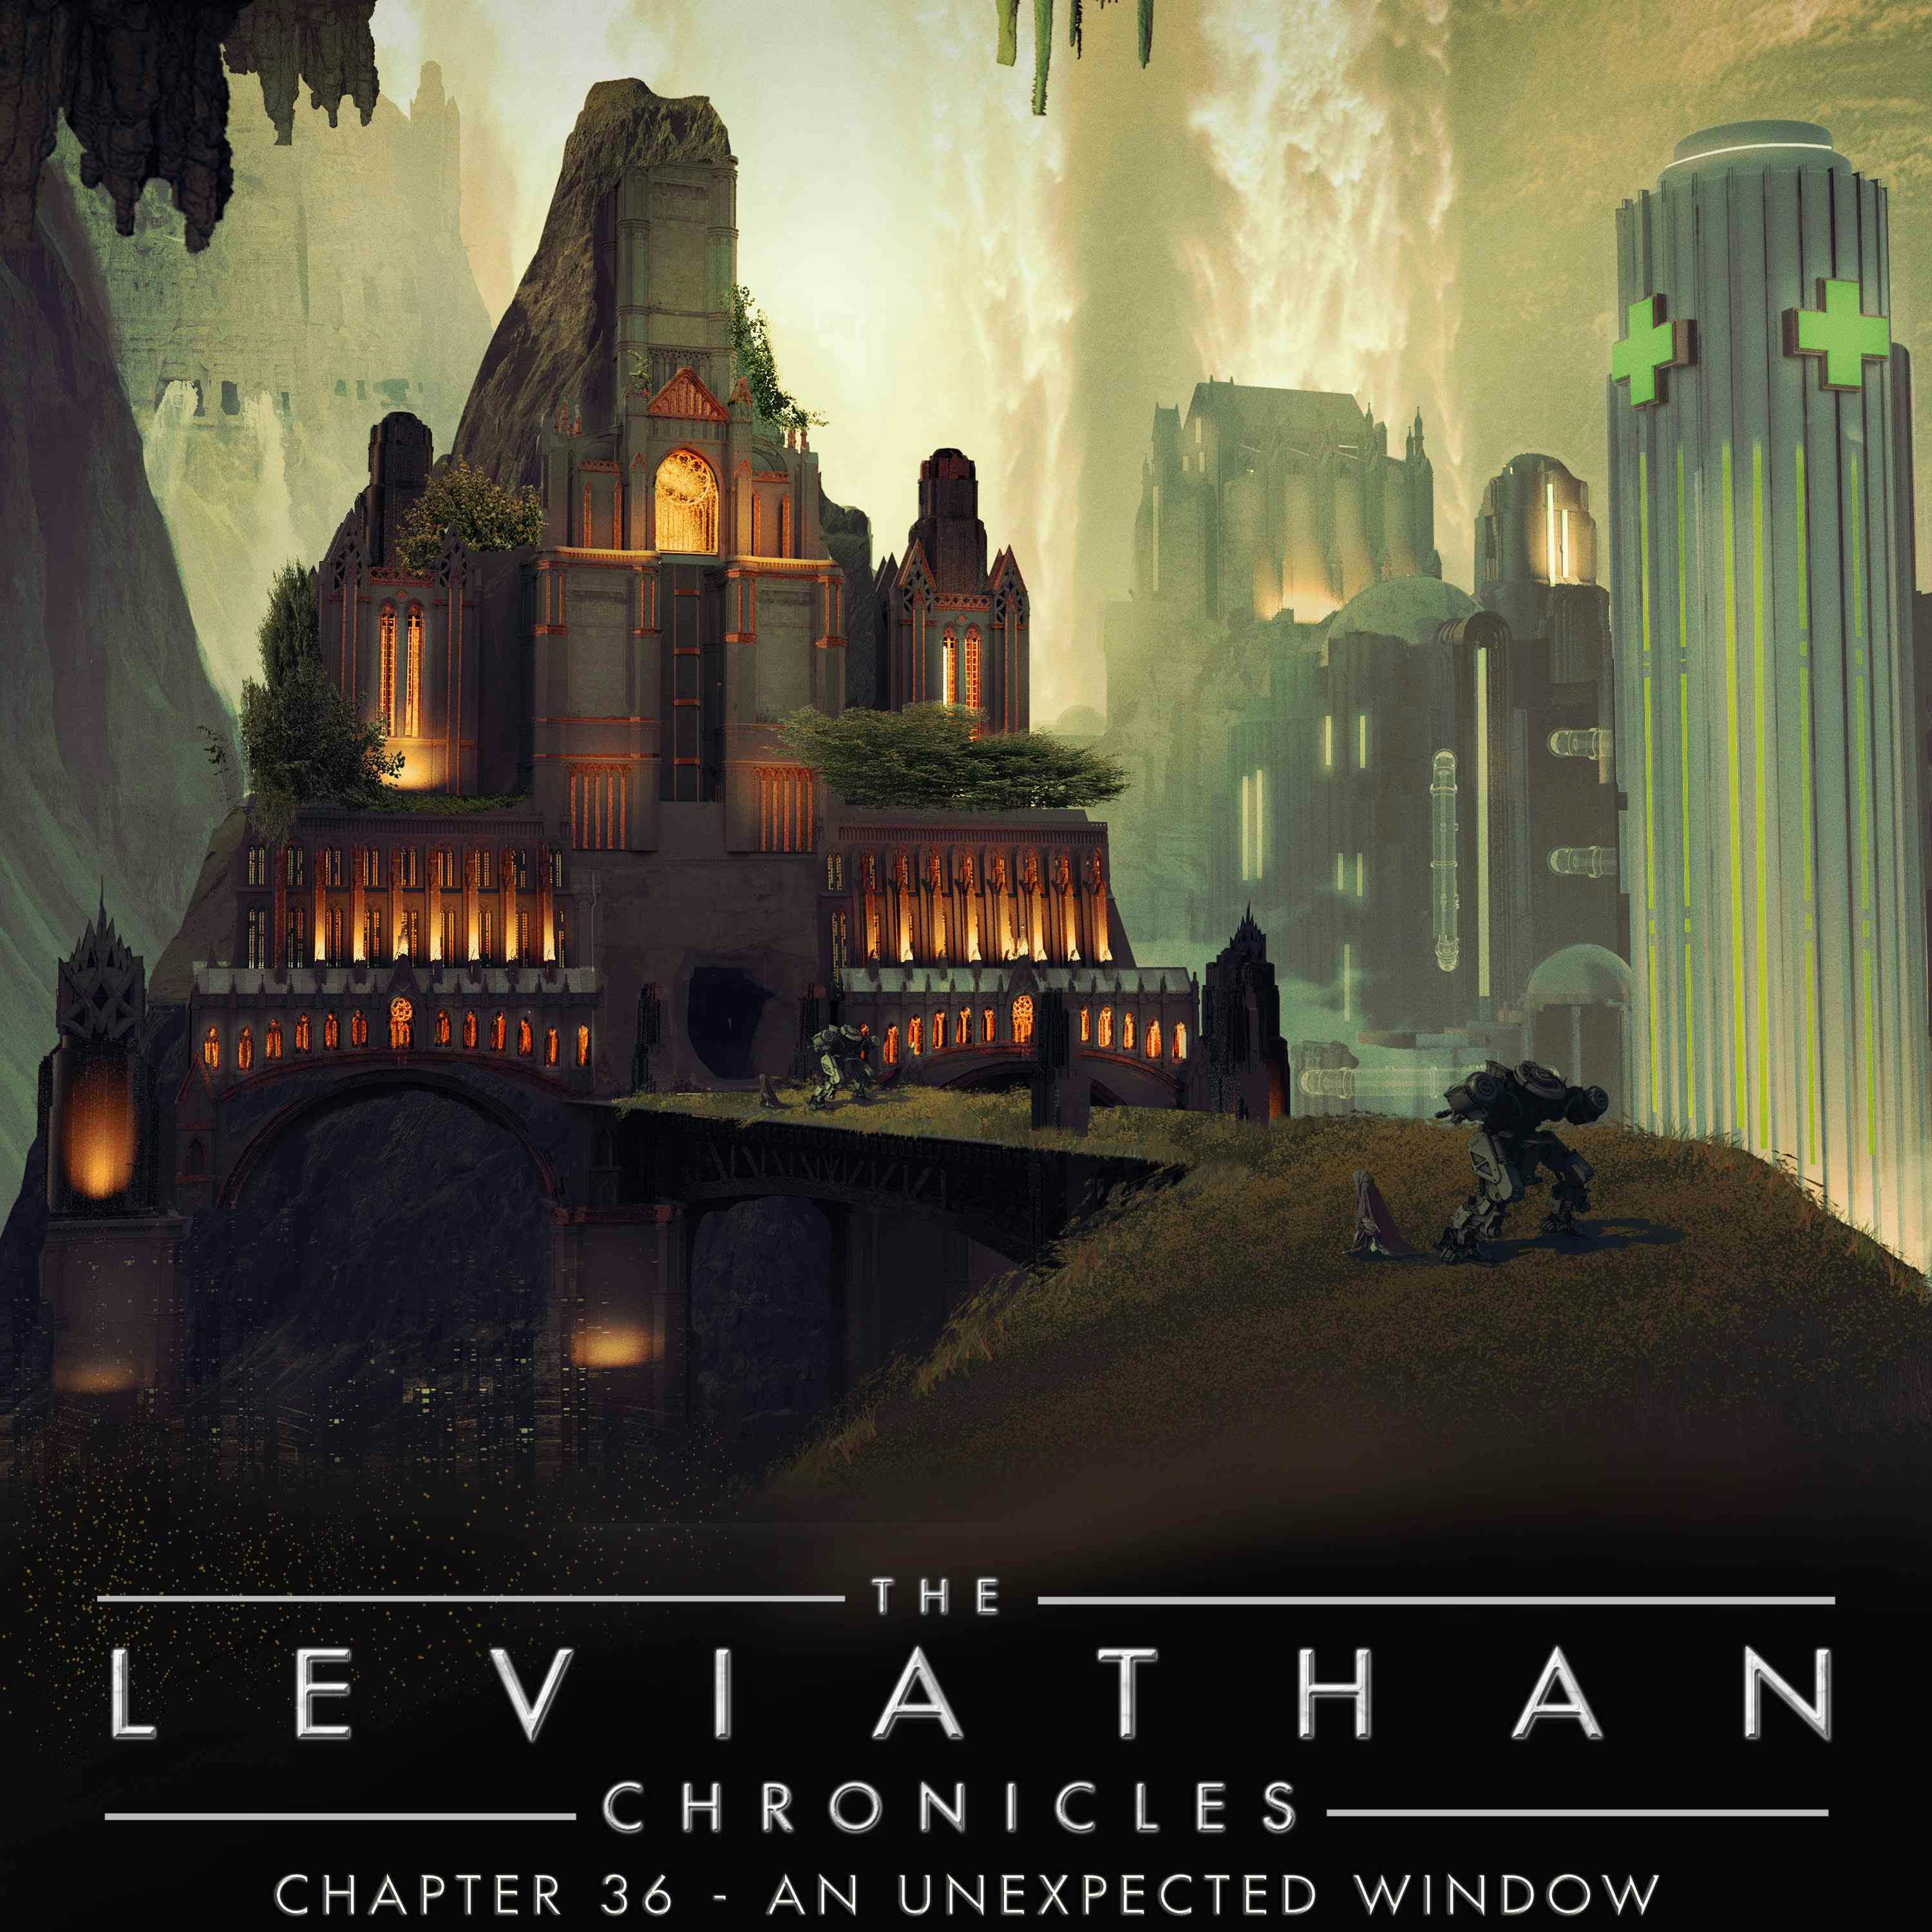 The Leviathan Chronicles | Chapter 36 - An Unexpected Window